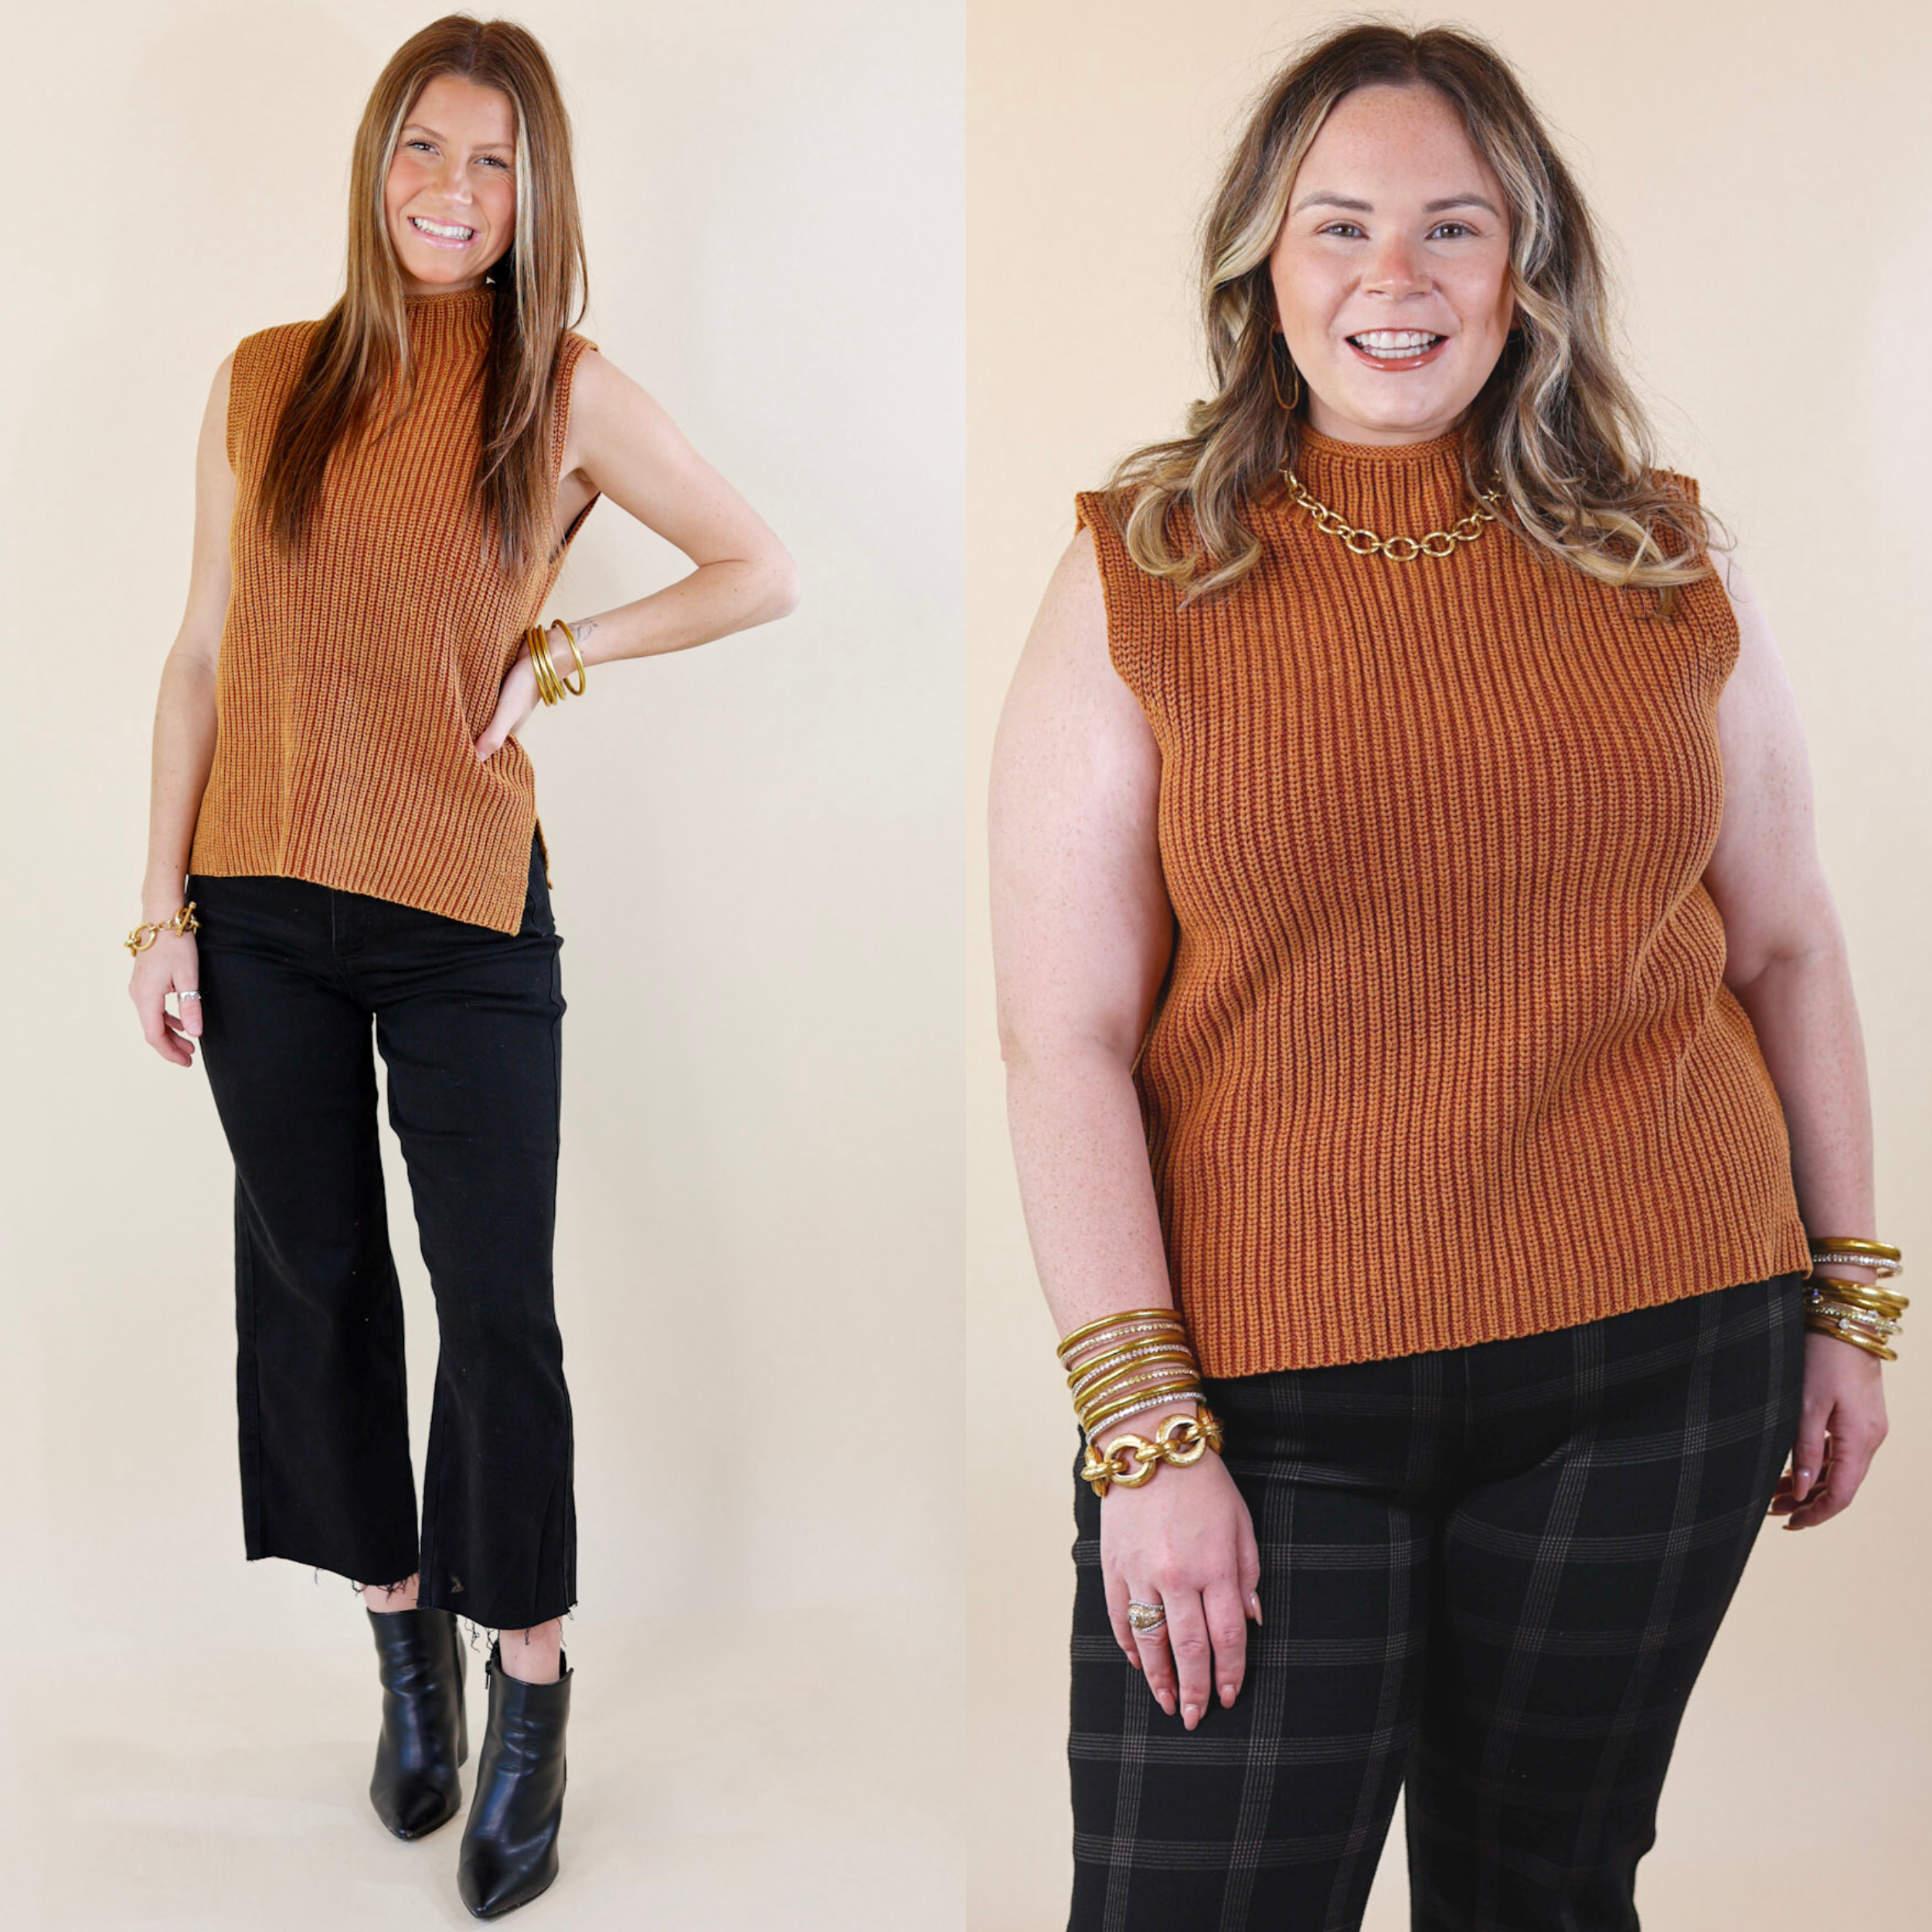 Models are wearing a ribbed turtle neck tank top in camel brown. Size small model has it paired with black cropped jeans, black booties, and gold jewelry. Size large model has it paired with plaid pants and gold jewelry.